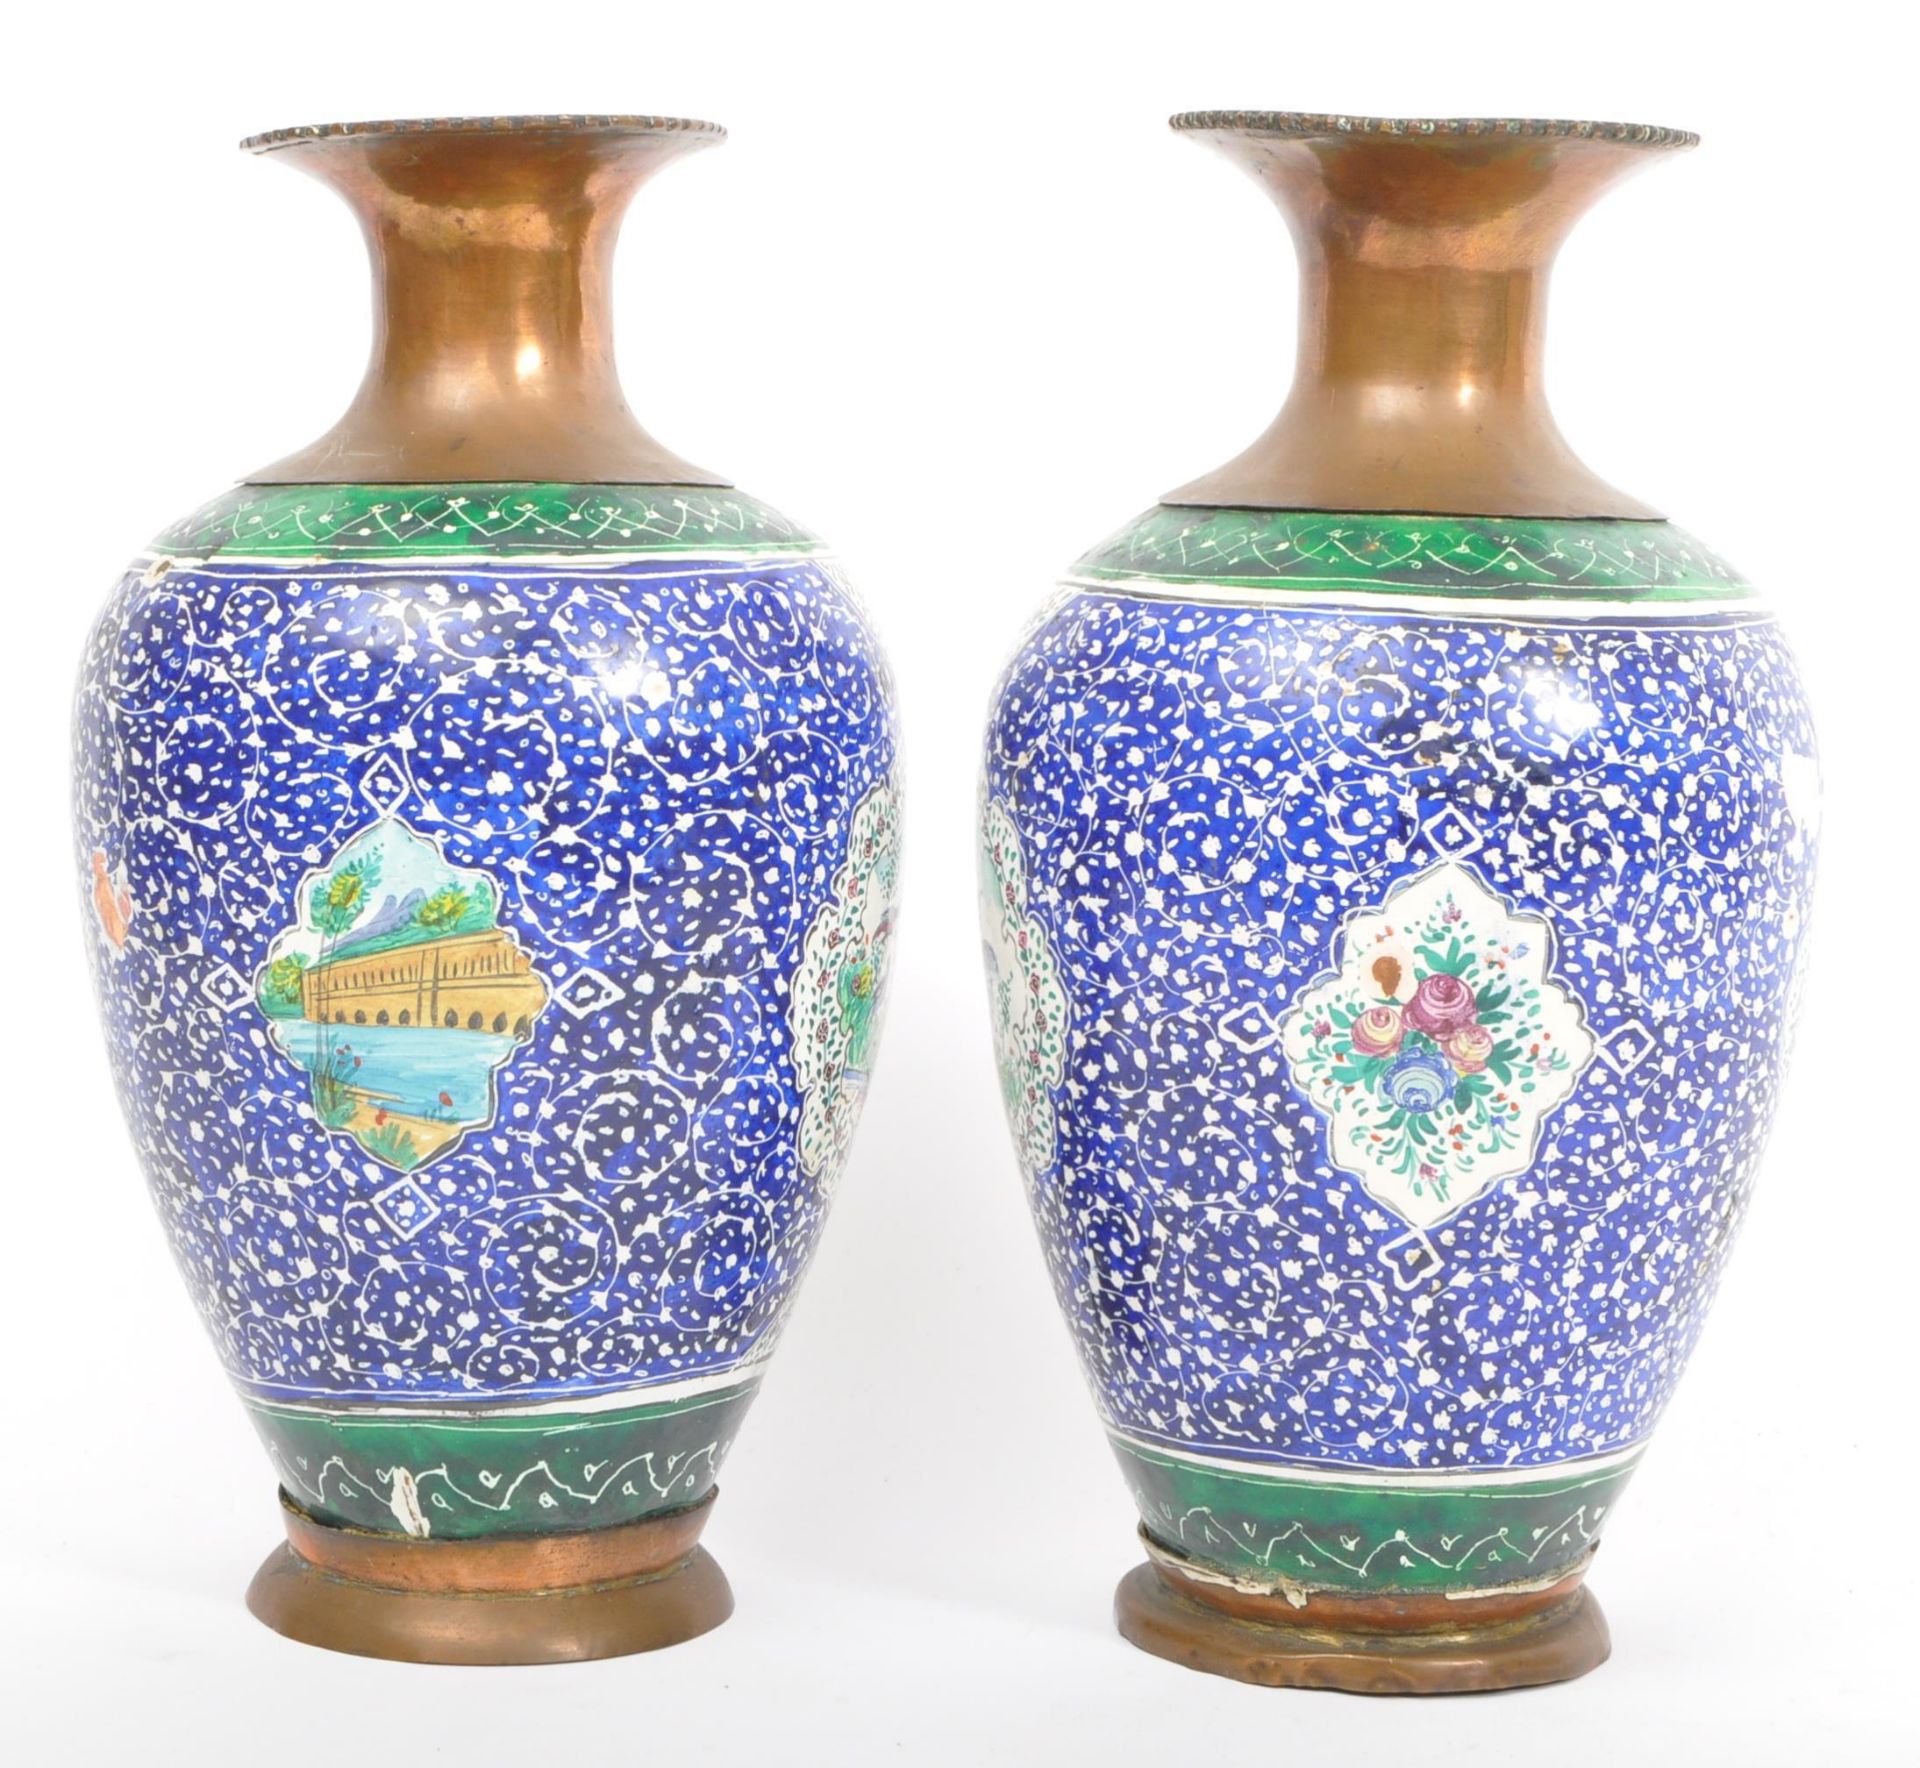 PAIR OF EARLY 20TH CENTURY COPPER & ENAMEL HAND PAINTED VASES - Image 2 of 5